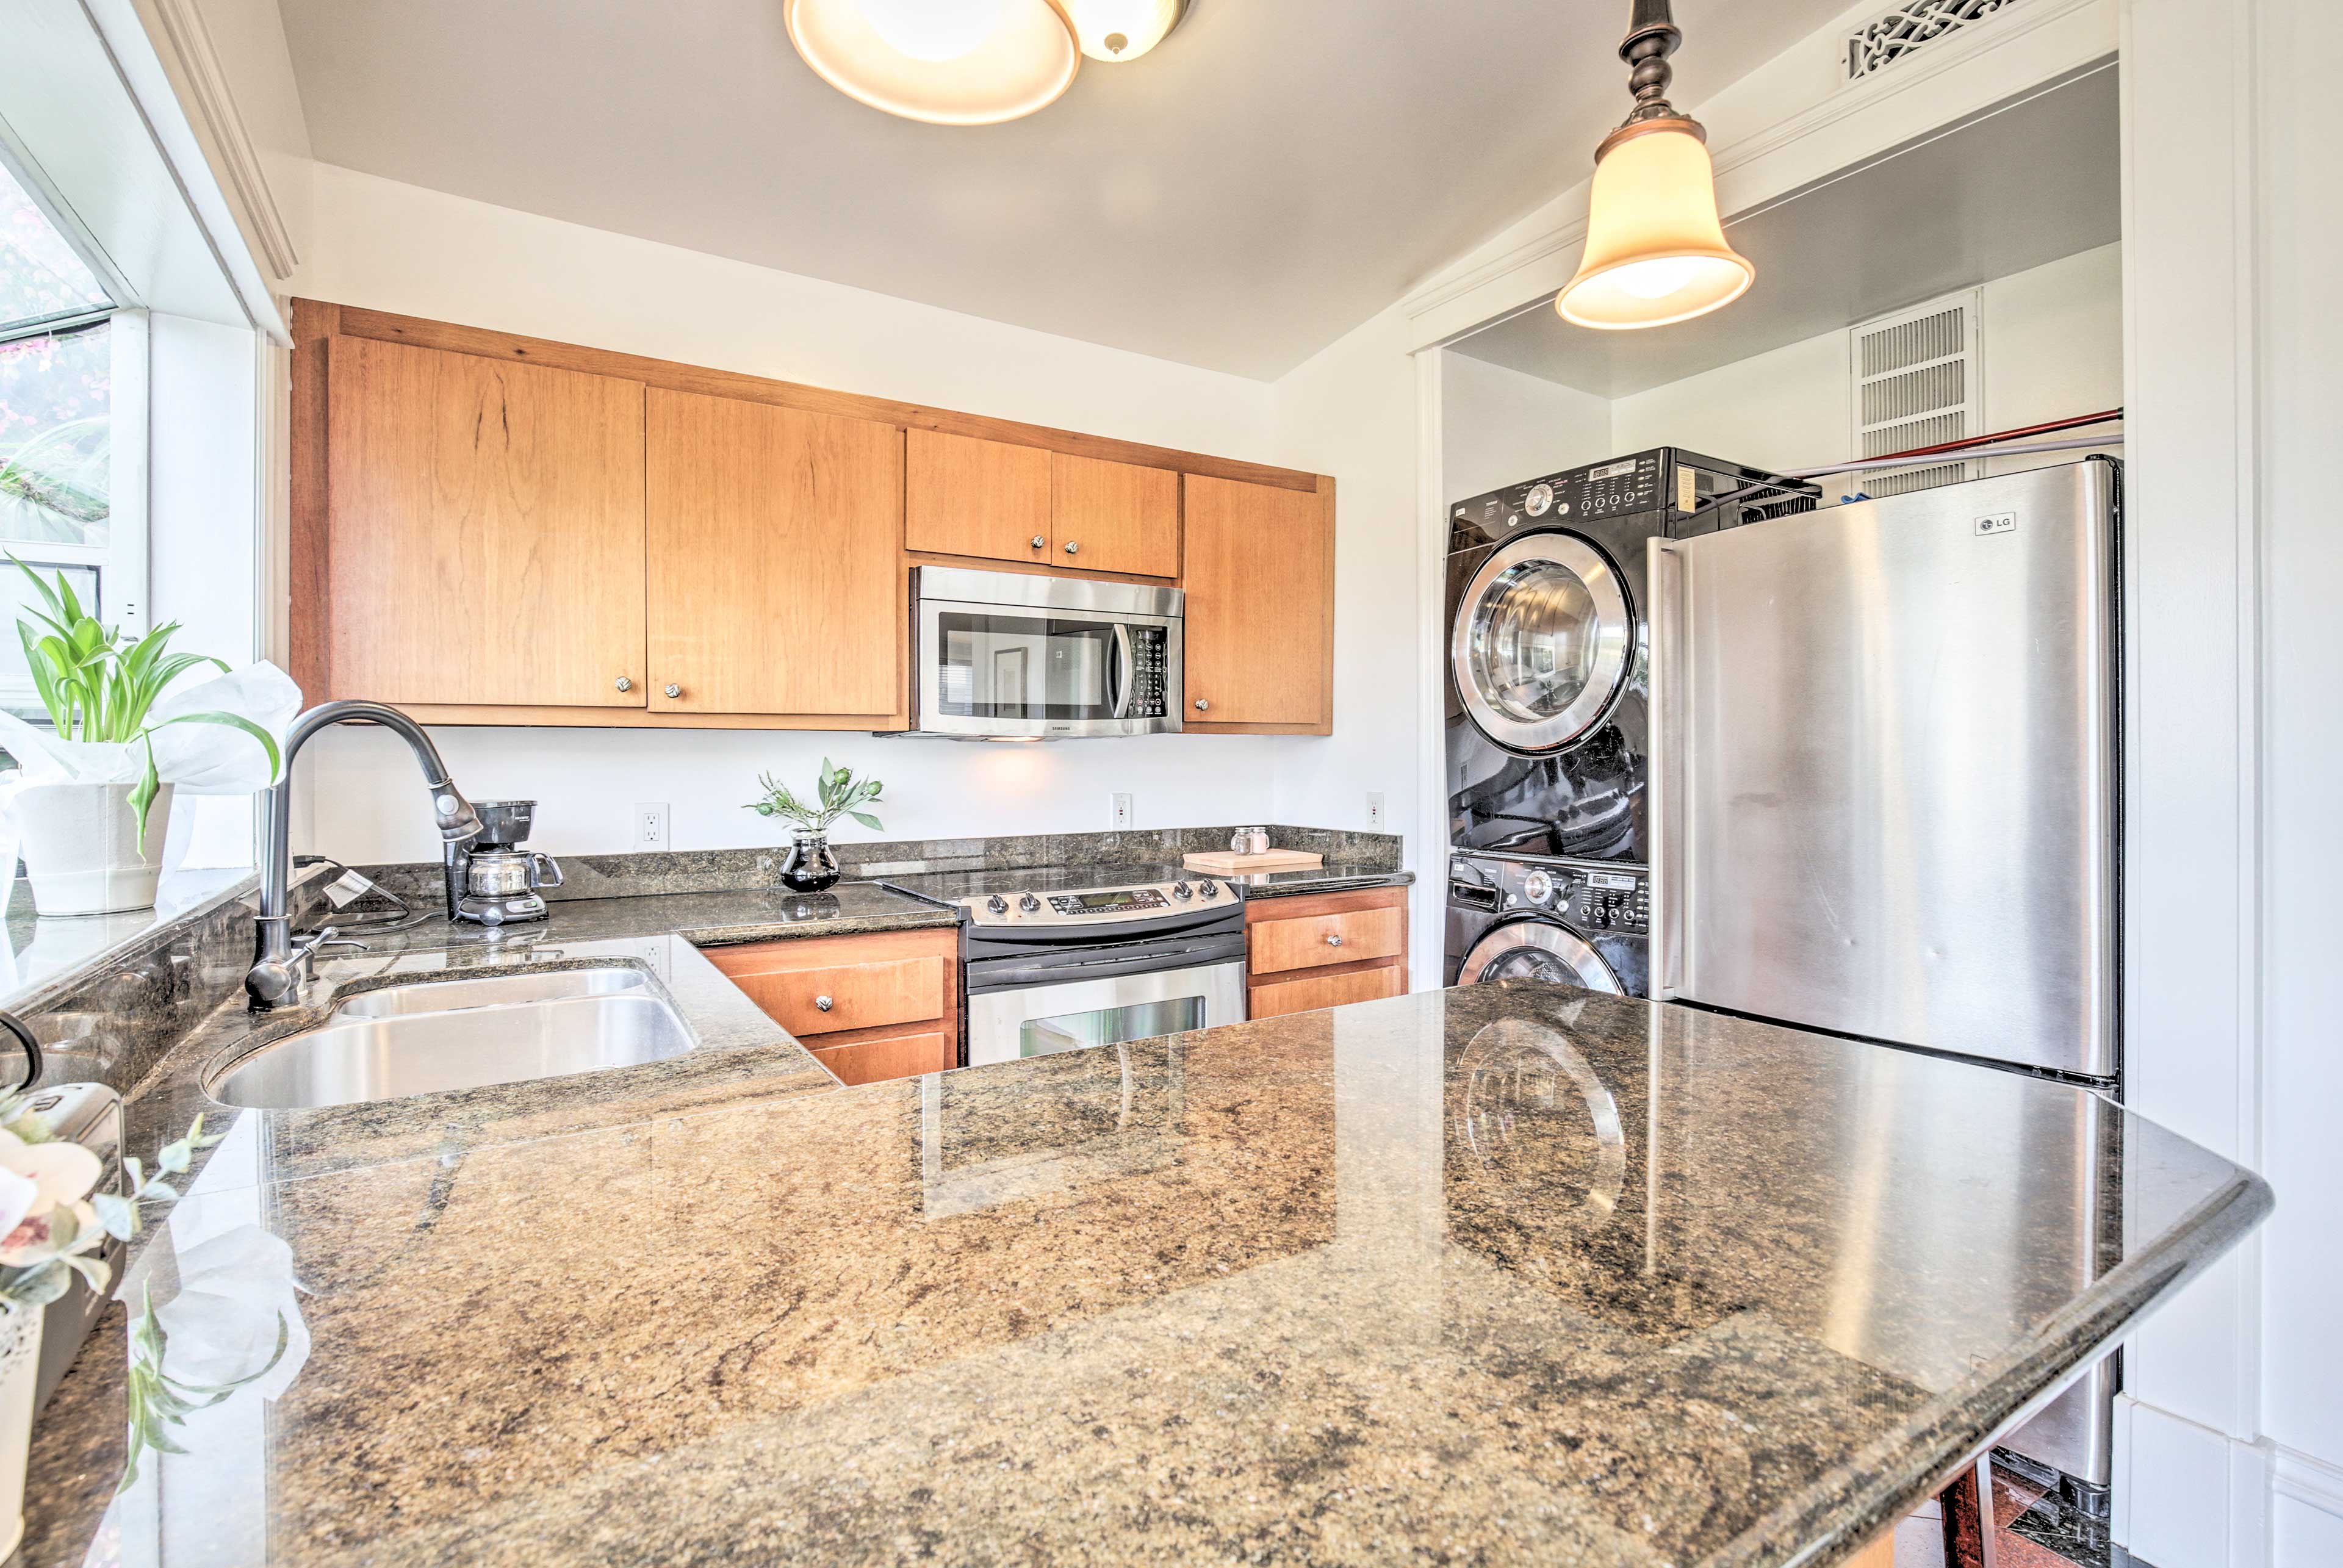 This kitchen is complete with granite countertops and stainless steel appliances